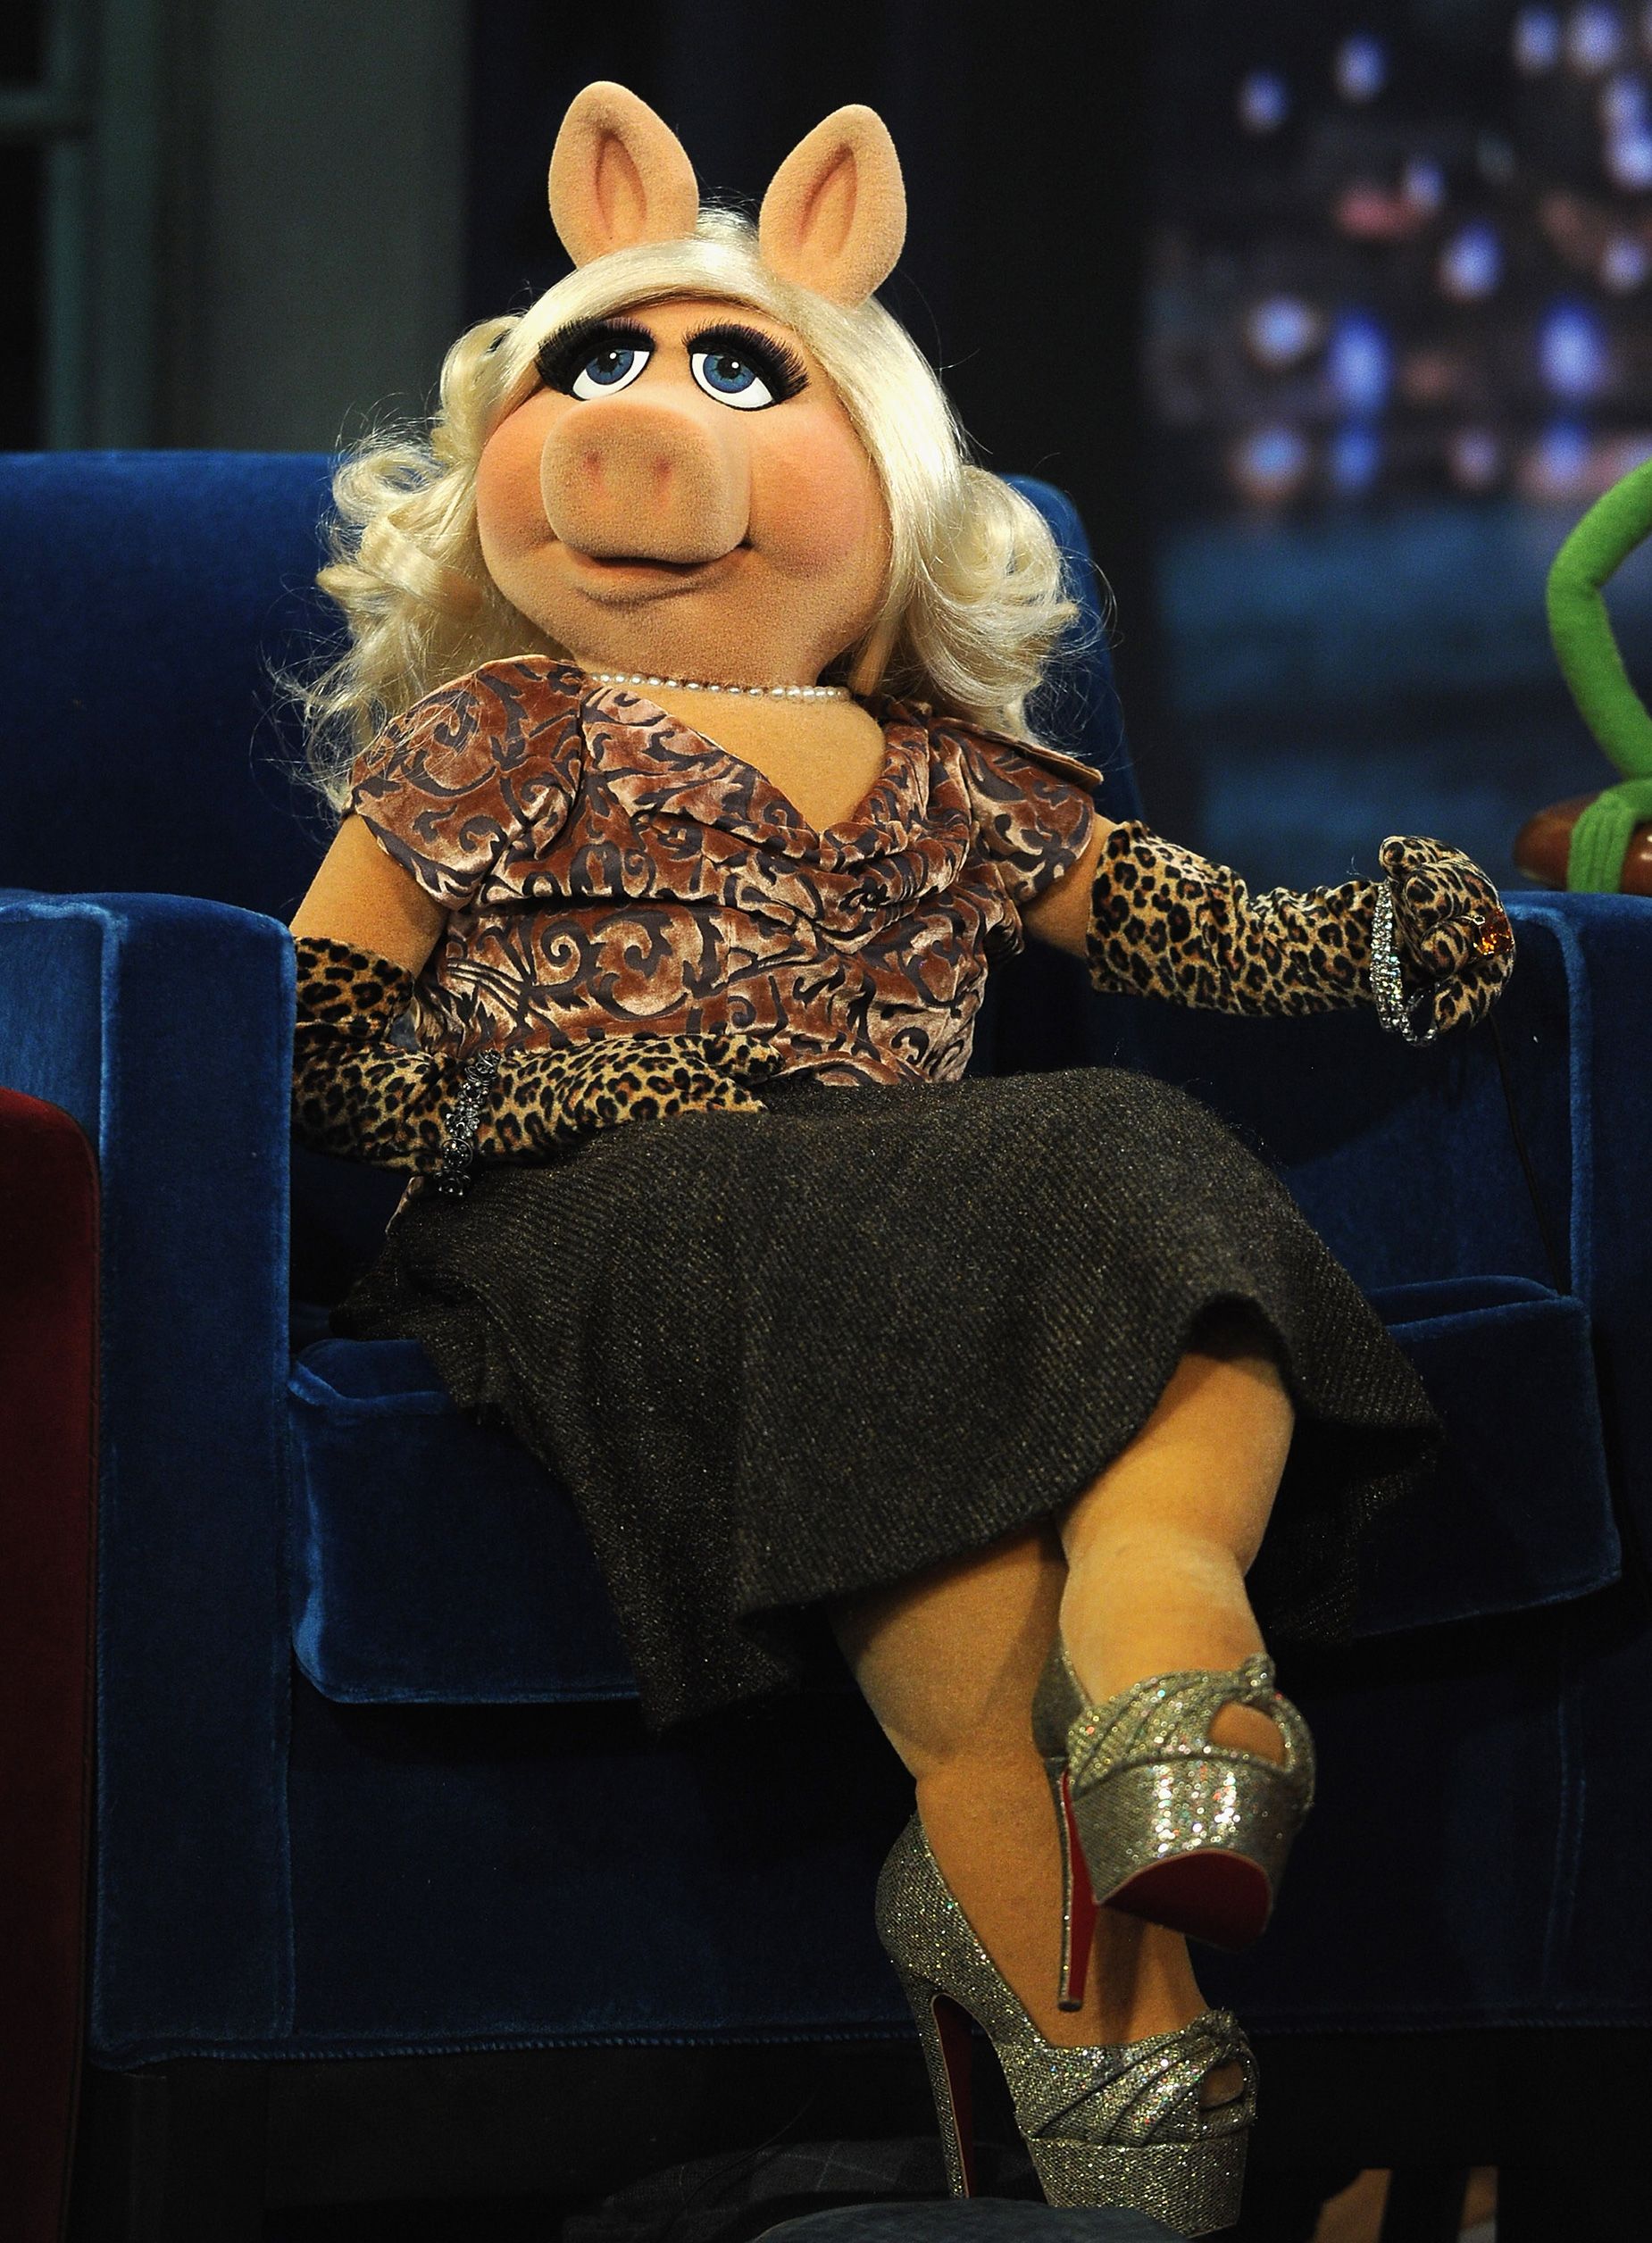 Miss Piggy in her Louboutins on the set of "Late Night with Jimmy Fallon" in 2011.